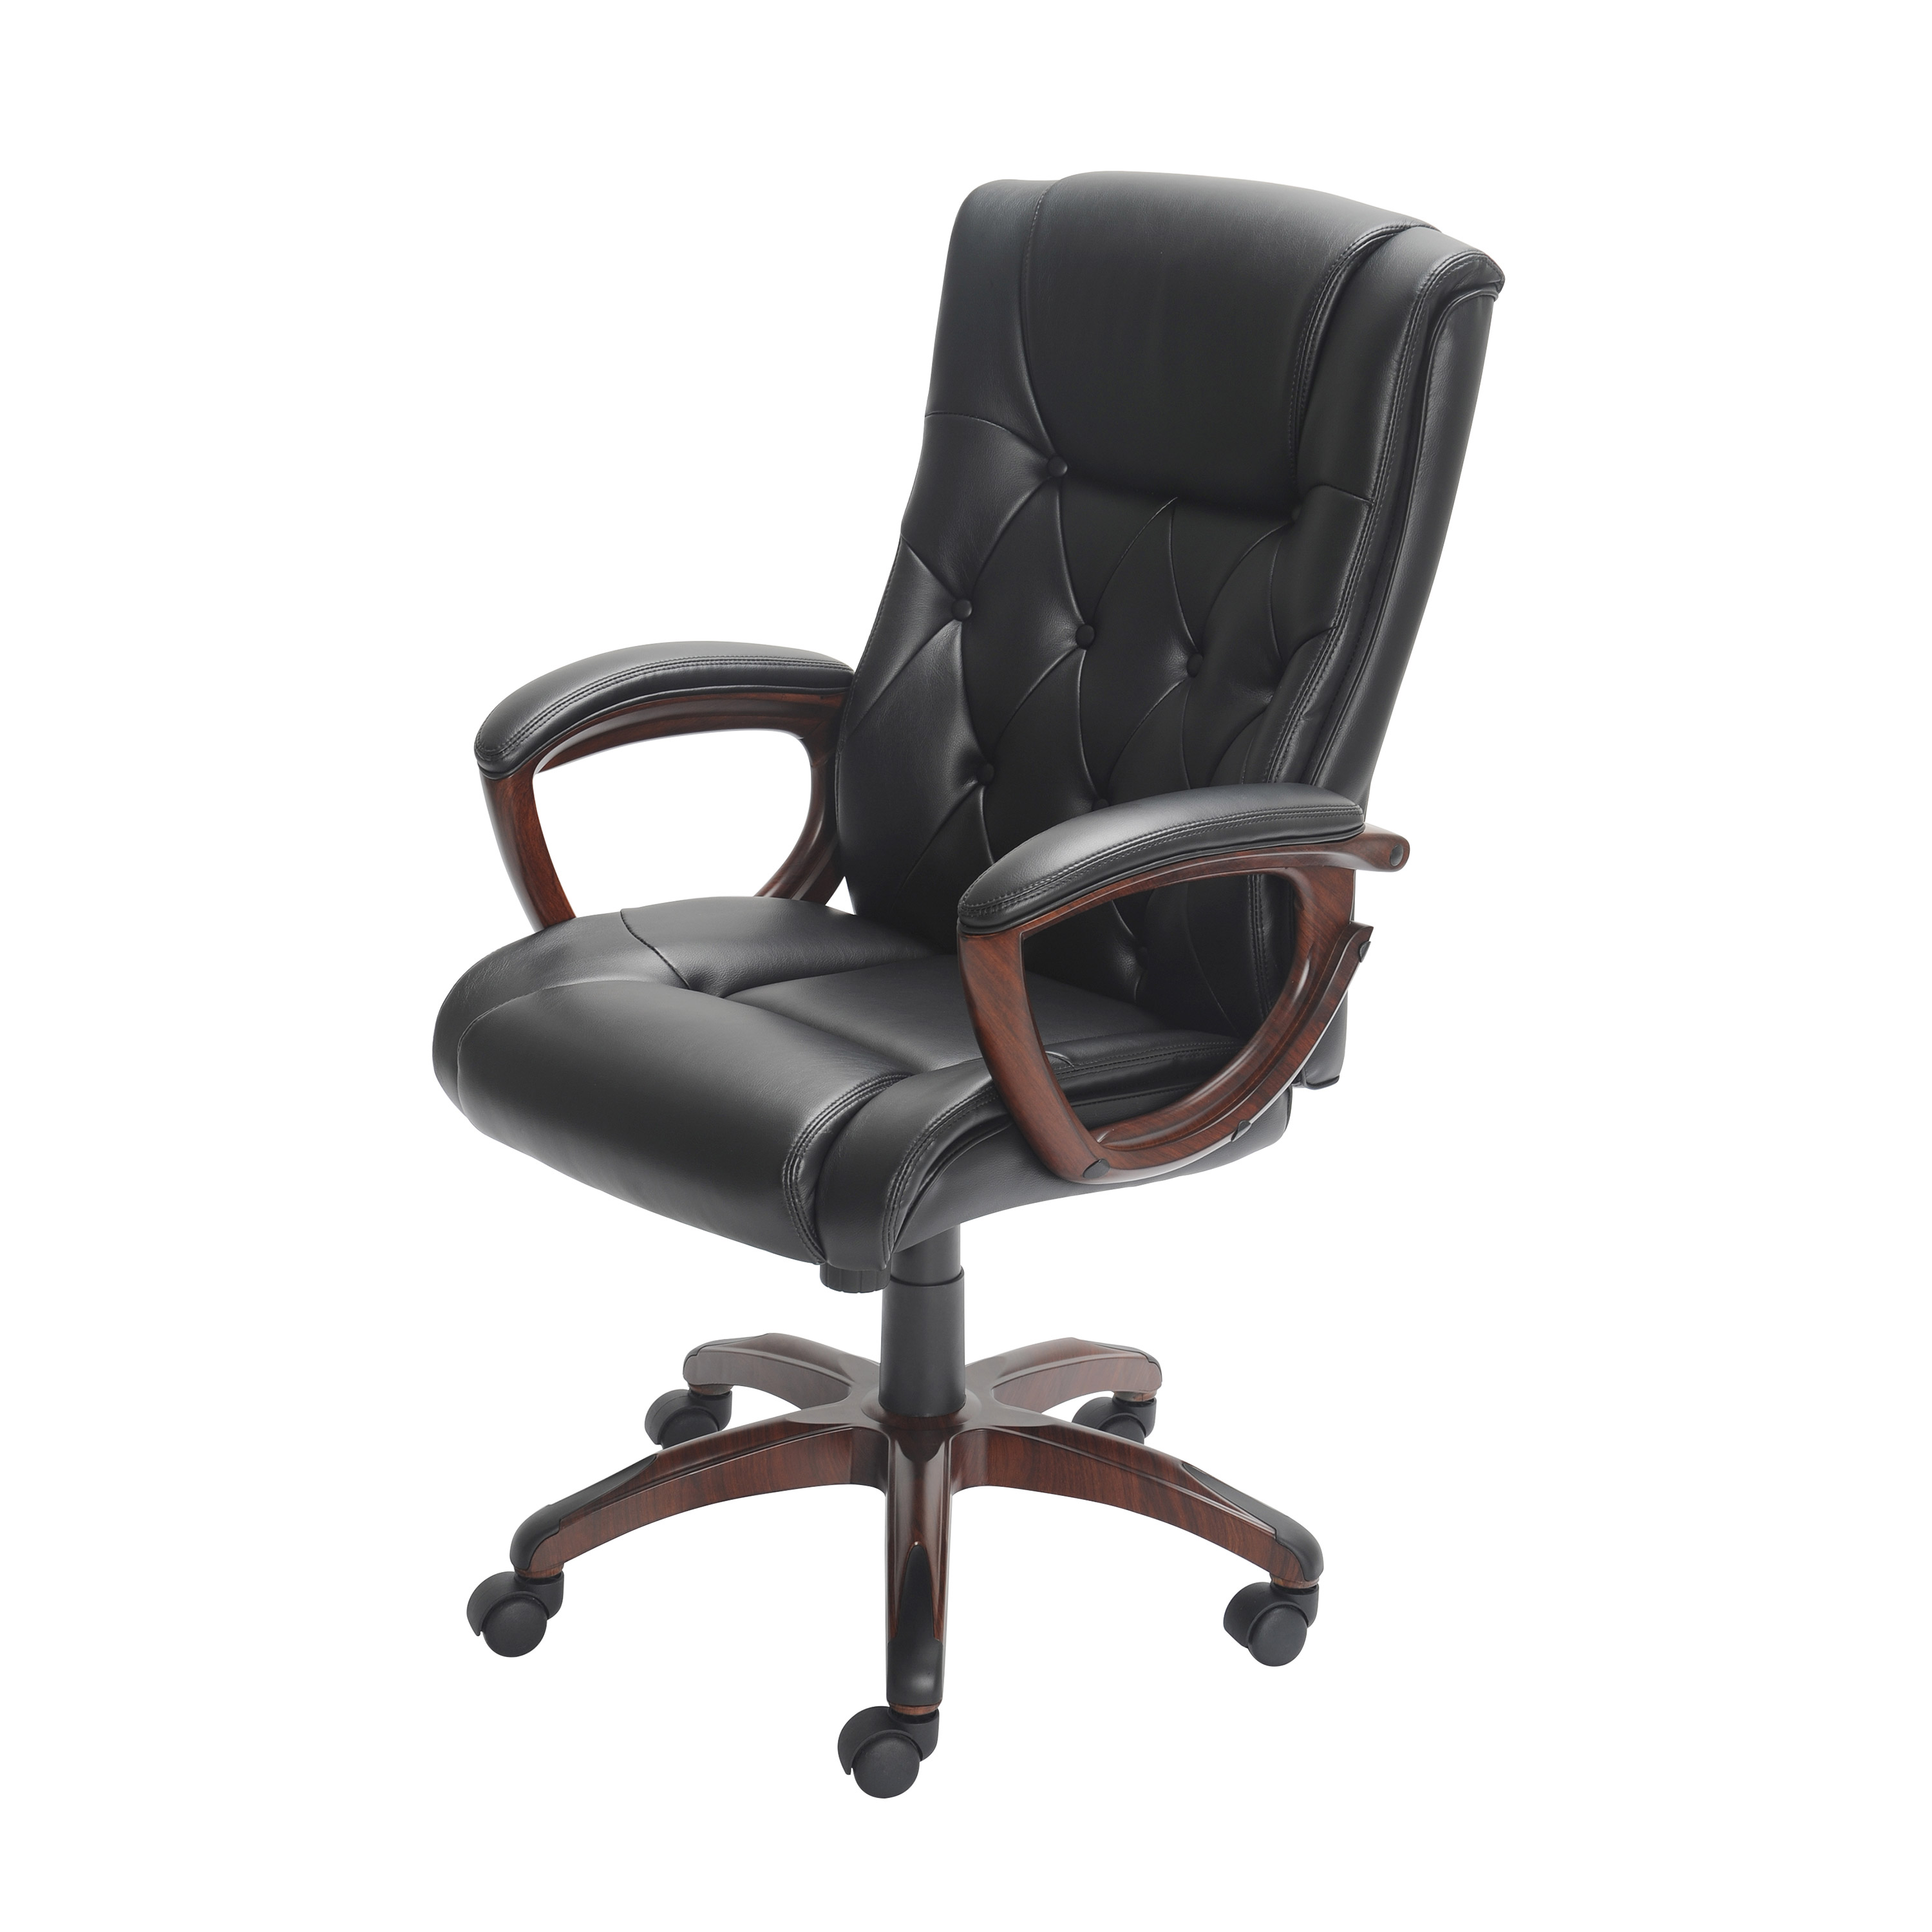 Better Homes and Gardens Executive, Mid-Back Manager's Office Chair with Arms, Black Bonded Leather - image 3 of 9